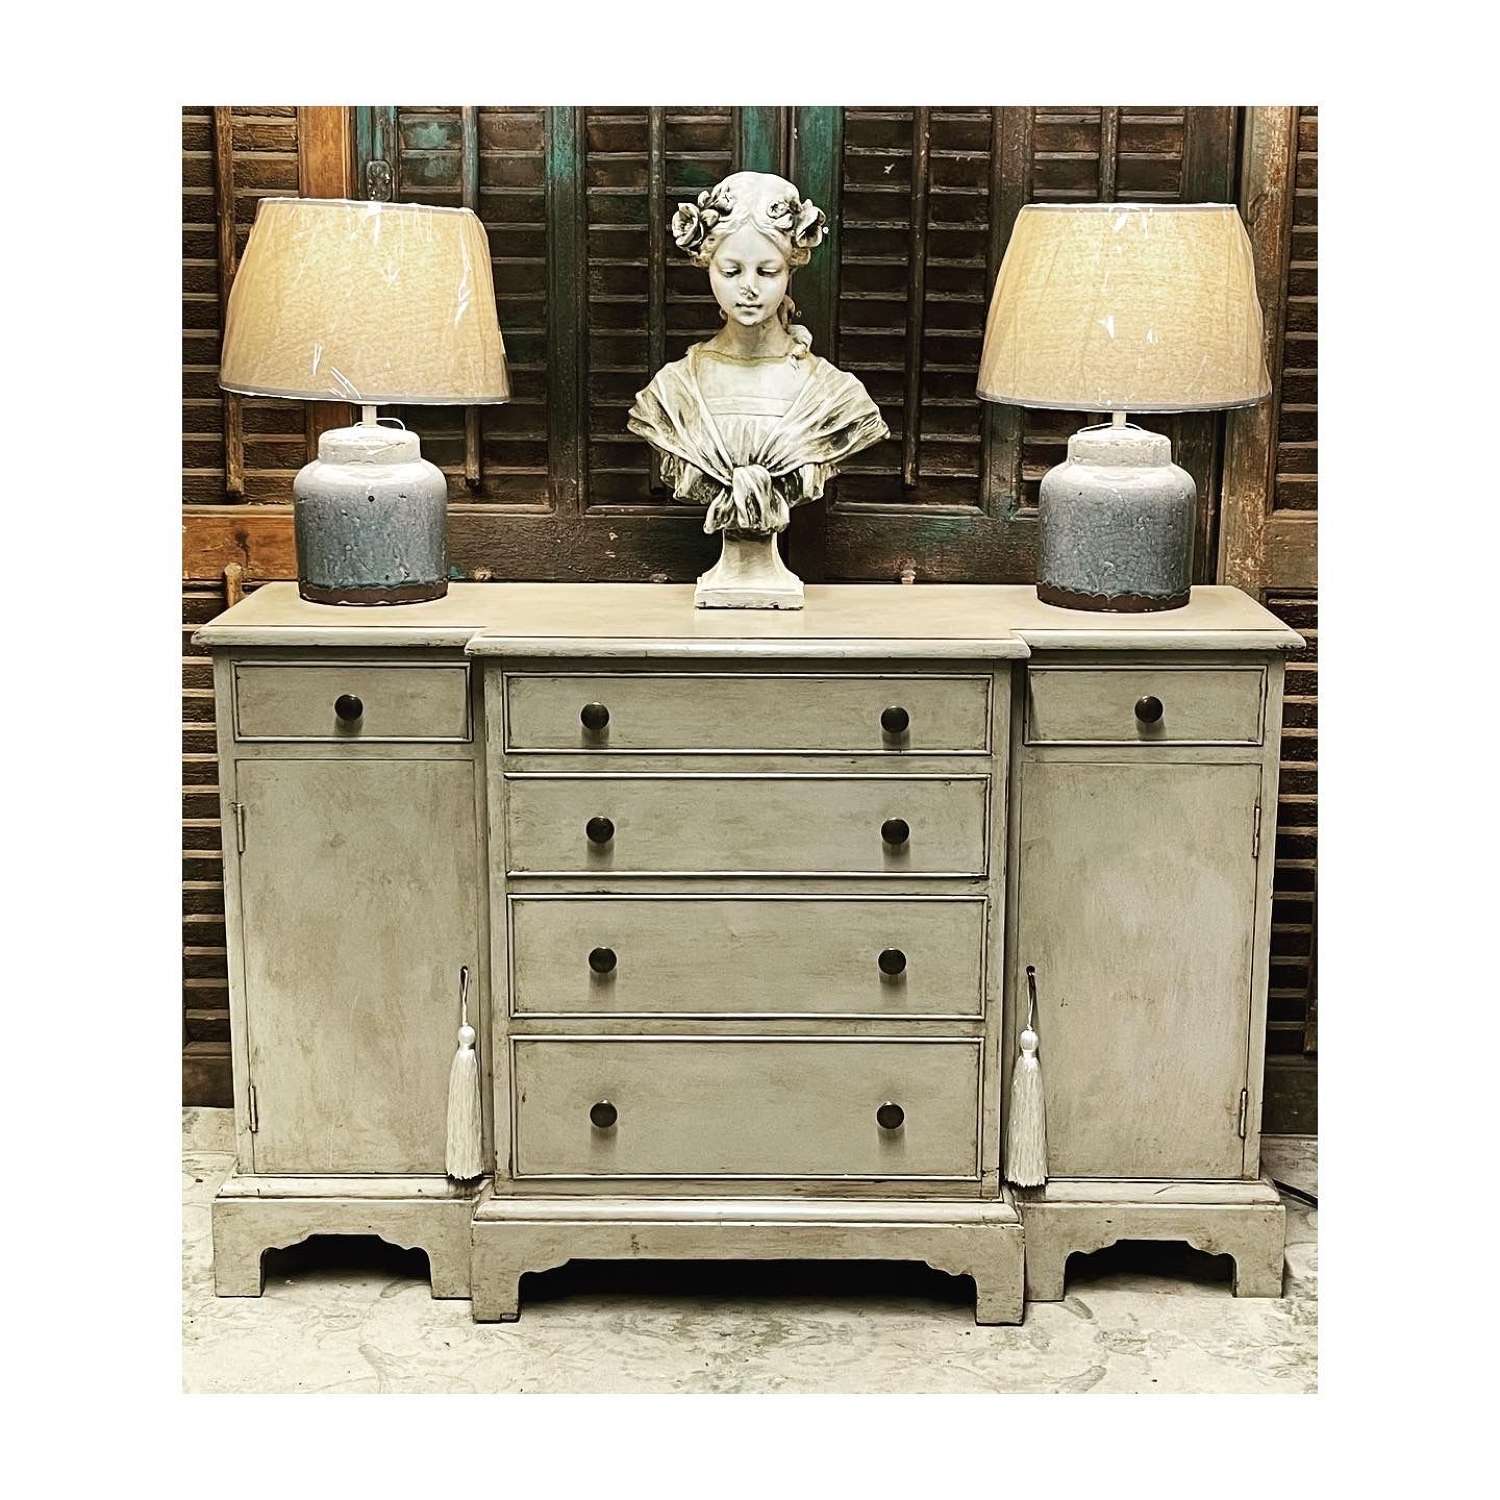 Gustavian style painted sideboard